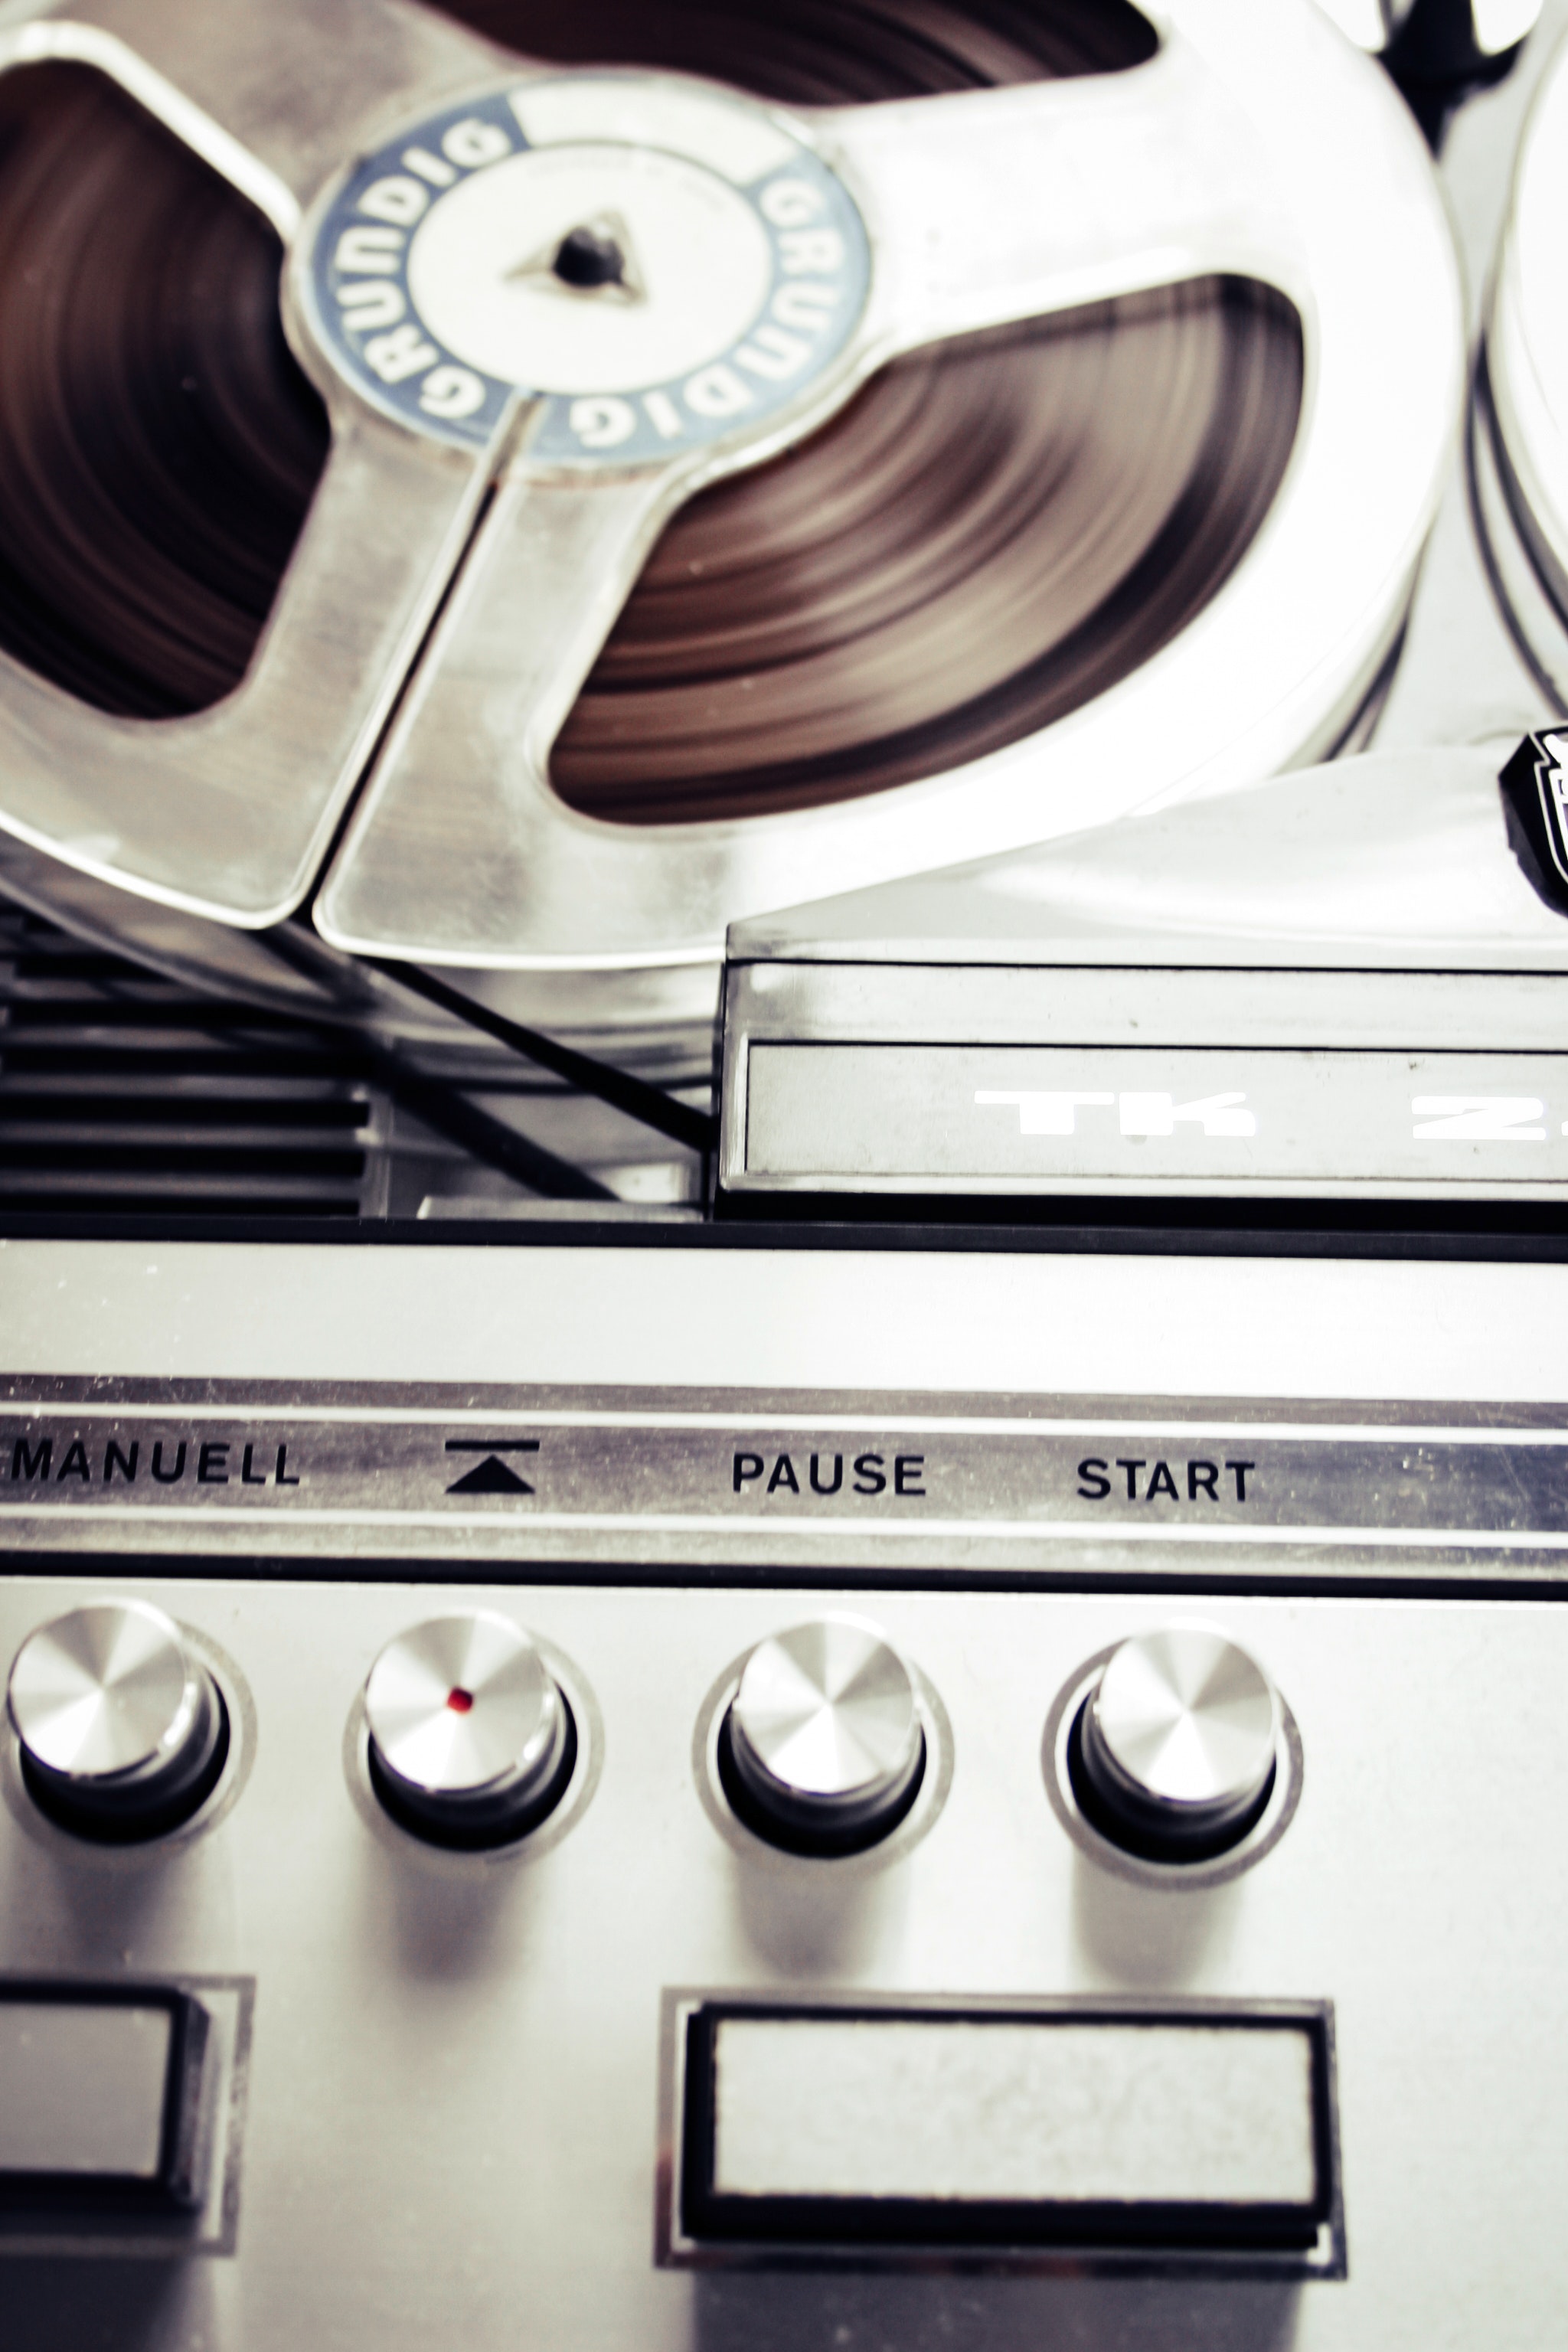 Q. What kind of reel-to-reel tape recorder do I need?